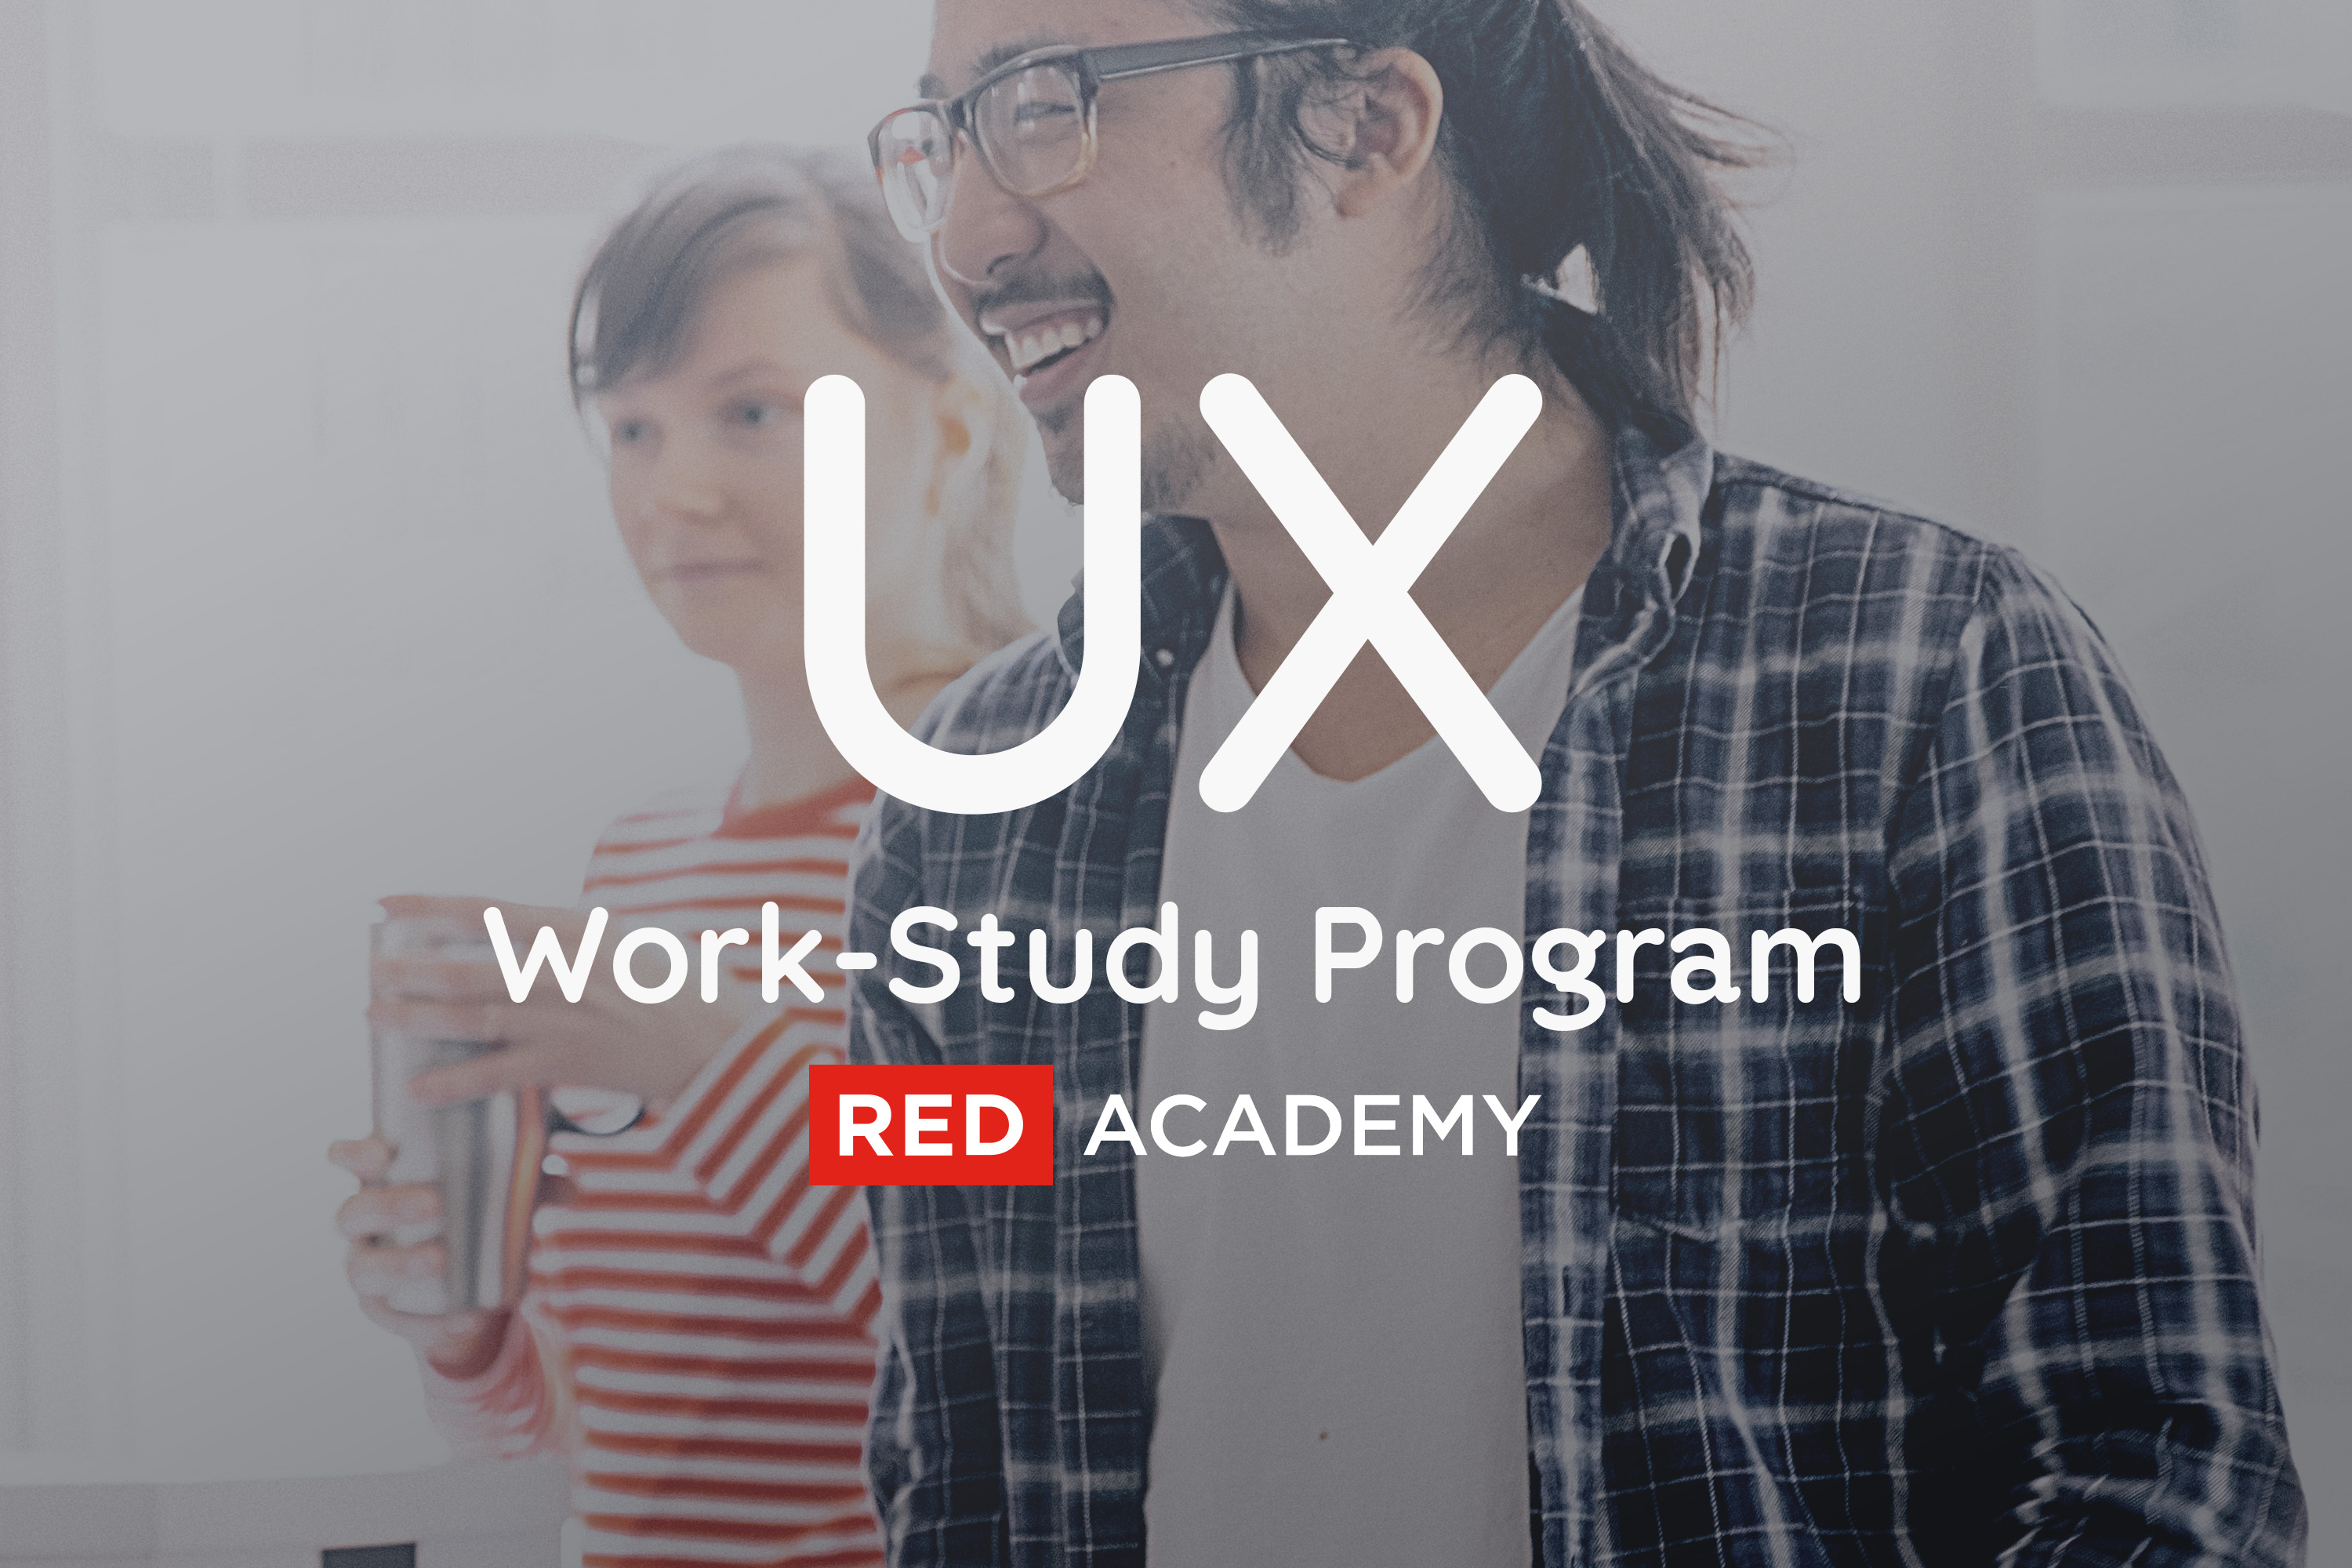 UX – RED